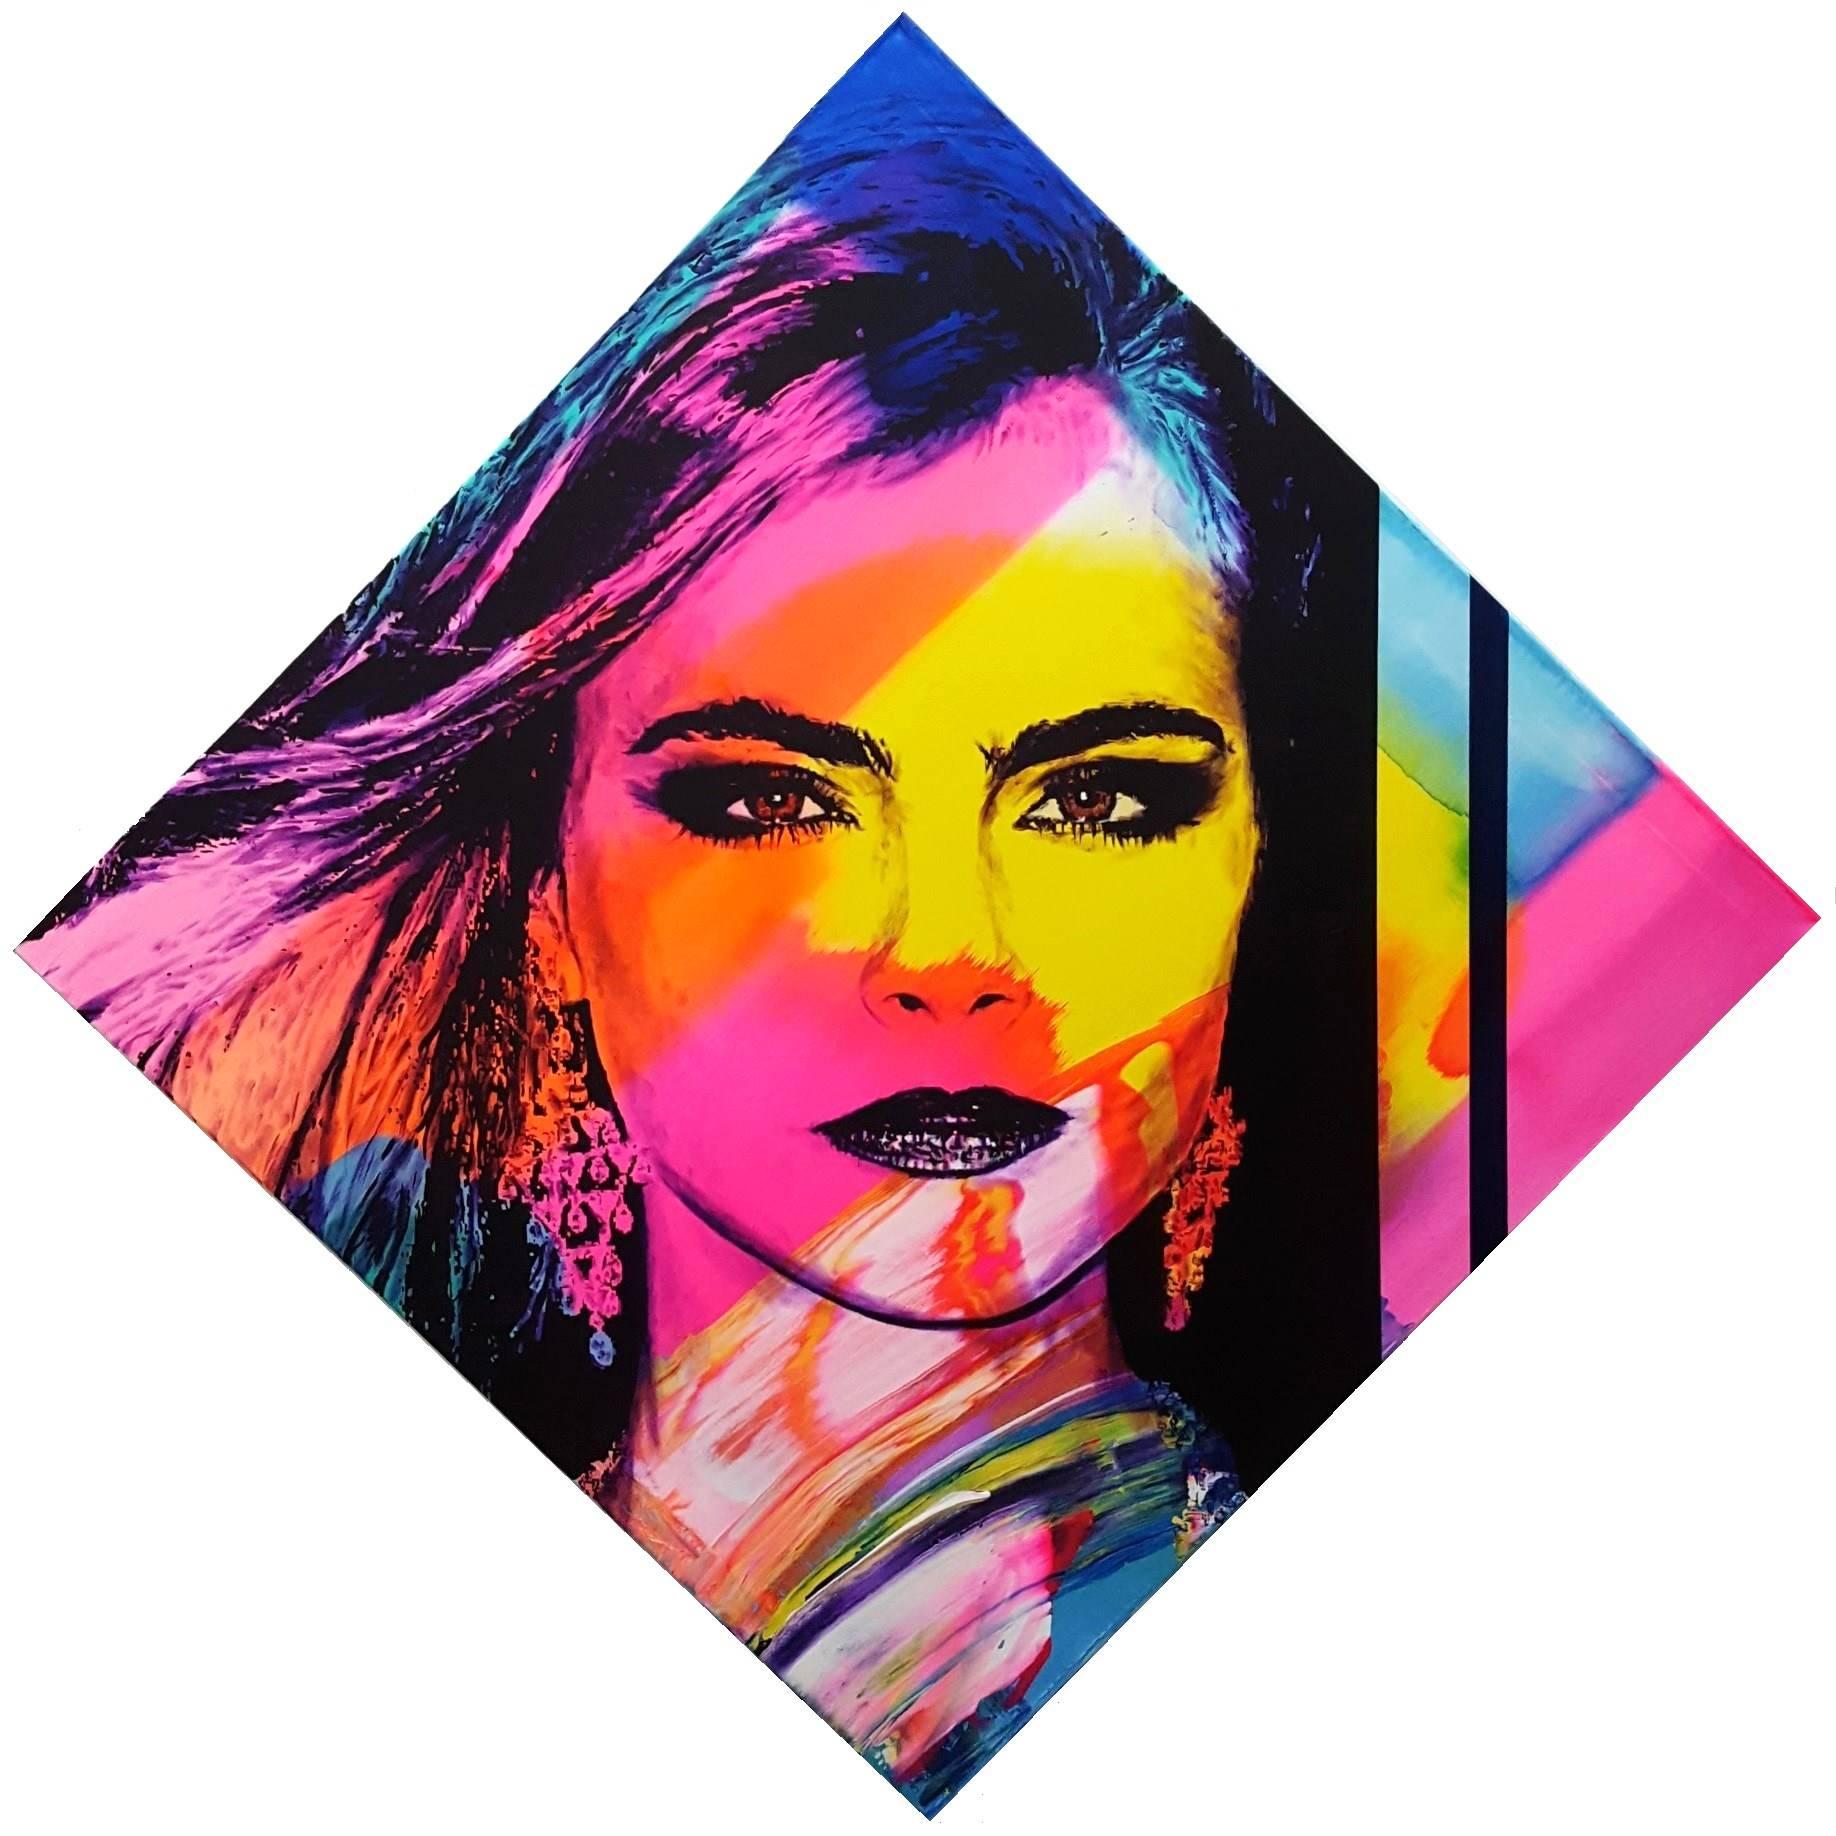 Portrait Painting Jack Graves III - Cara Delevingne Icone VII /// Contemporary Street Pop Art Fashion Model Actrice 